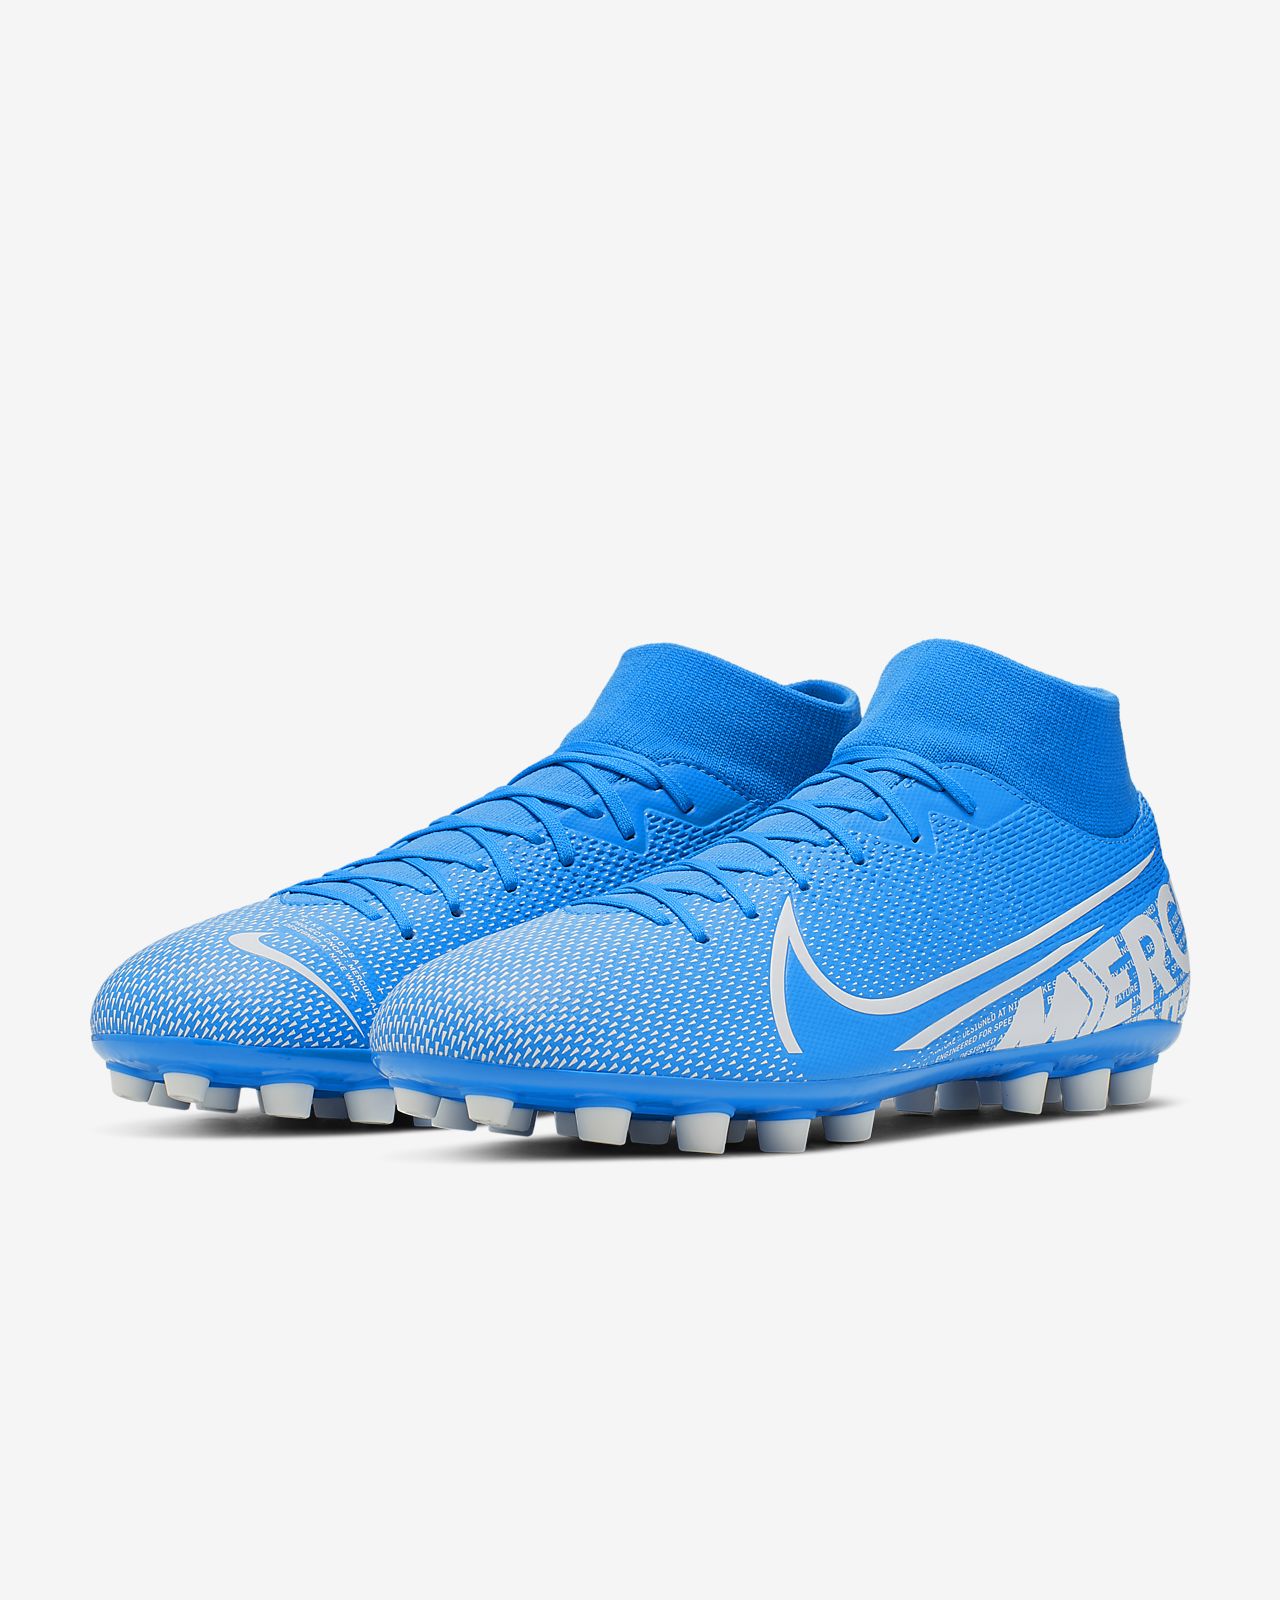 Nike Mercurial Superfly 7 Academy TF Artificial Turf.